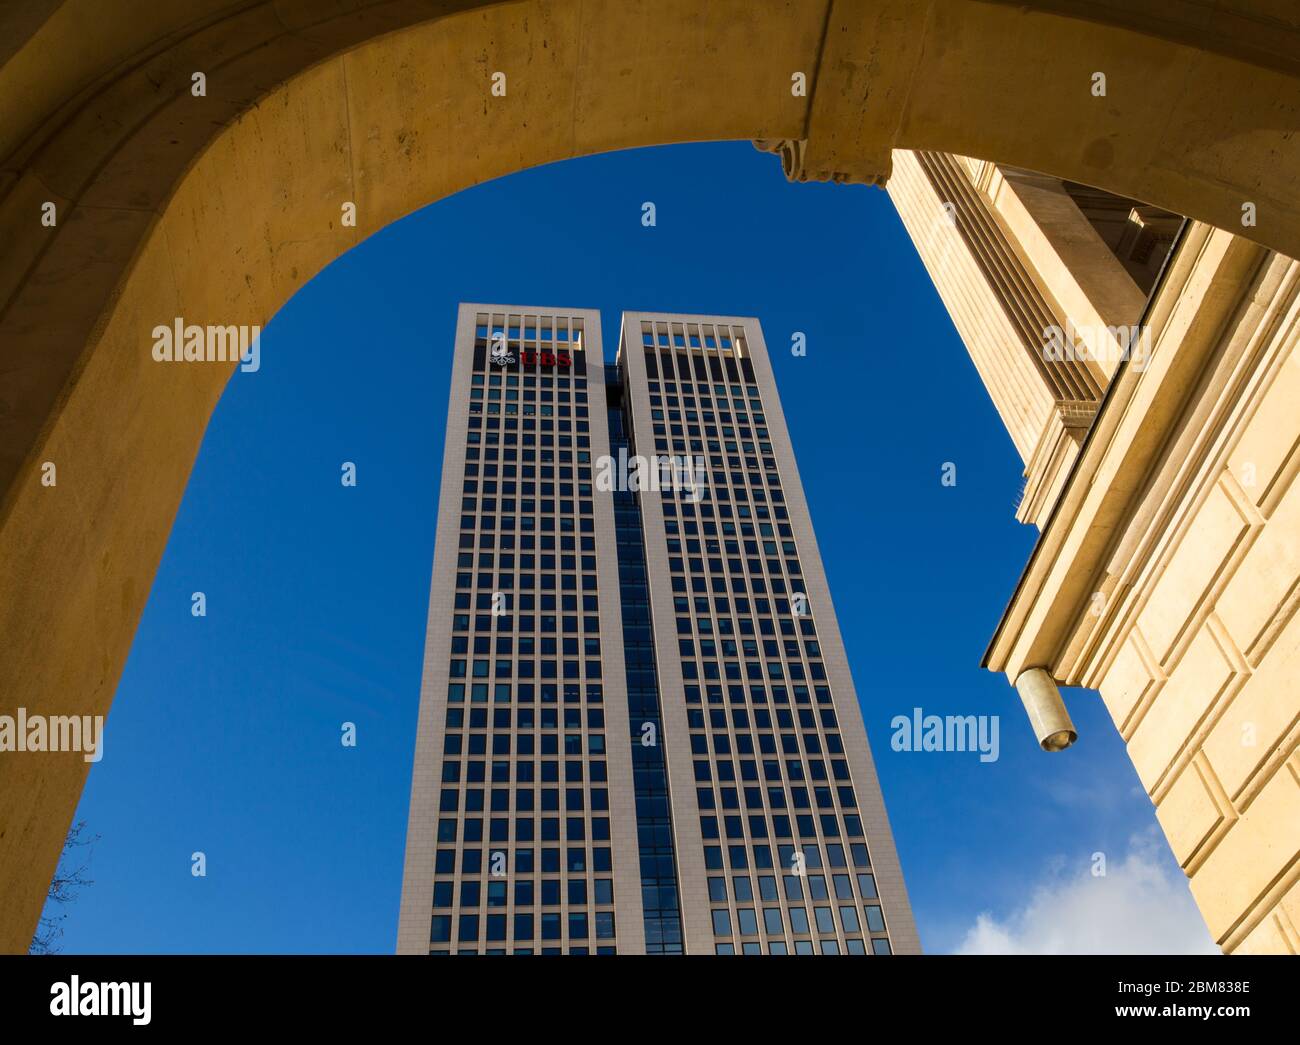 Financial business towers in Frankfurt am Main, seen from the arched portico of the Alte Oper. Stock Photo